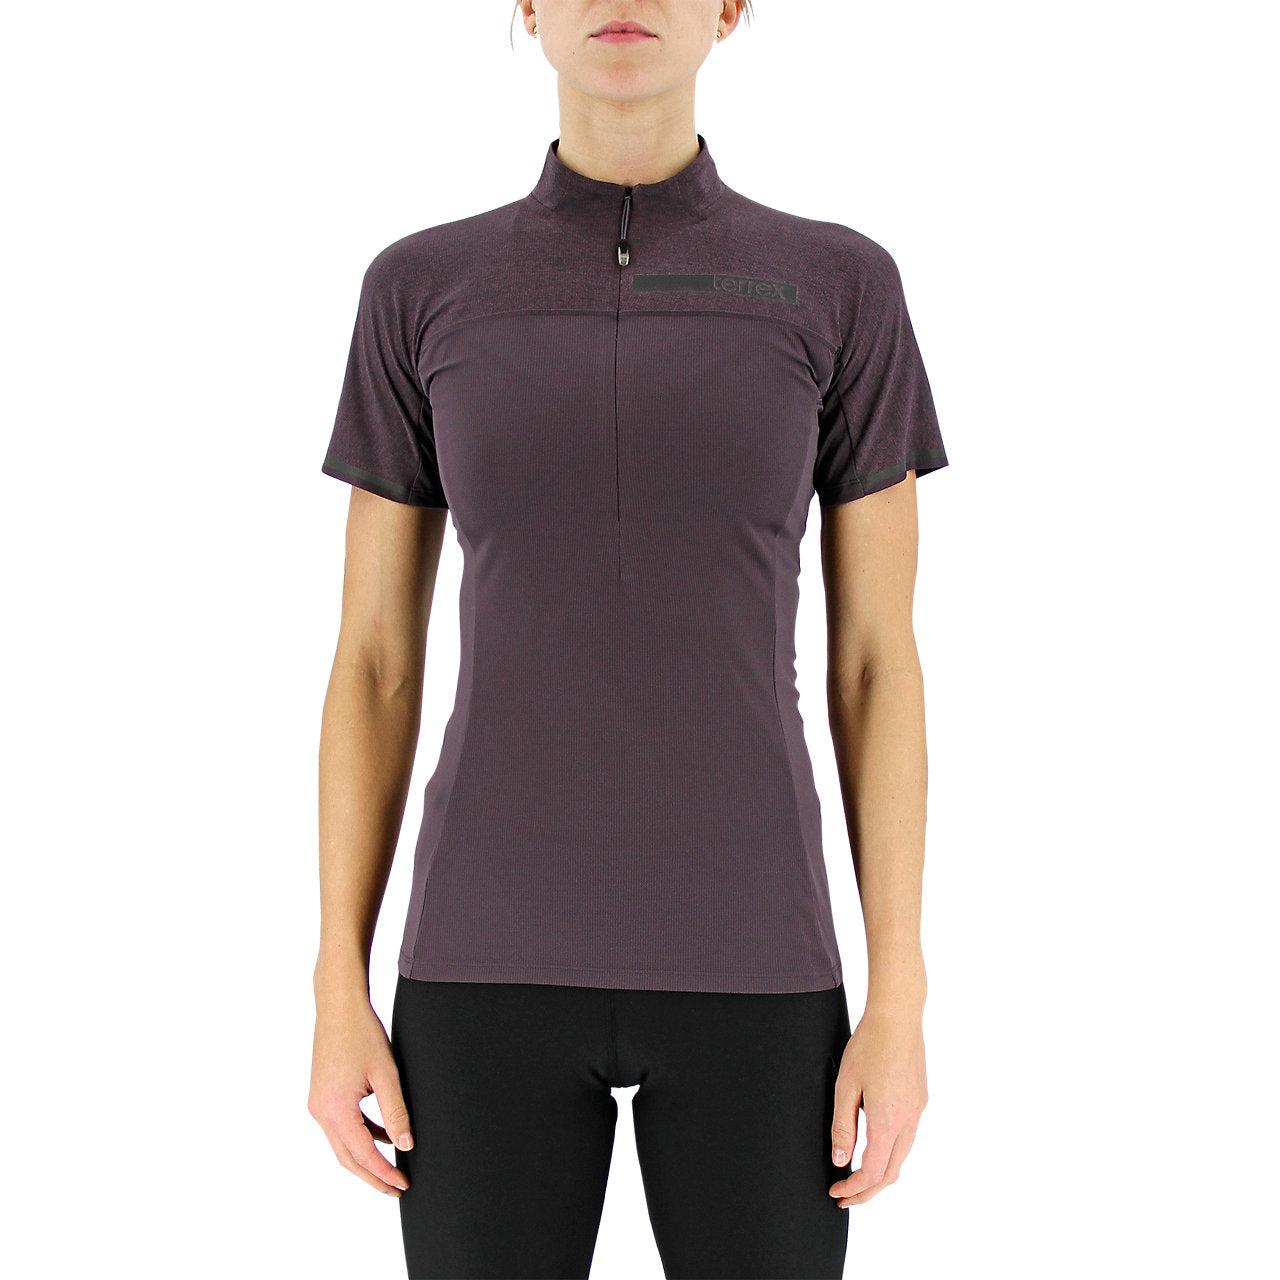 Adidas Terrex Climachill Tee - Red Mineral (AI2446)